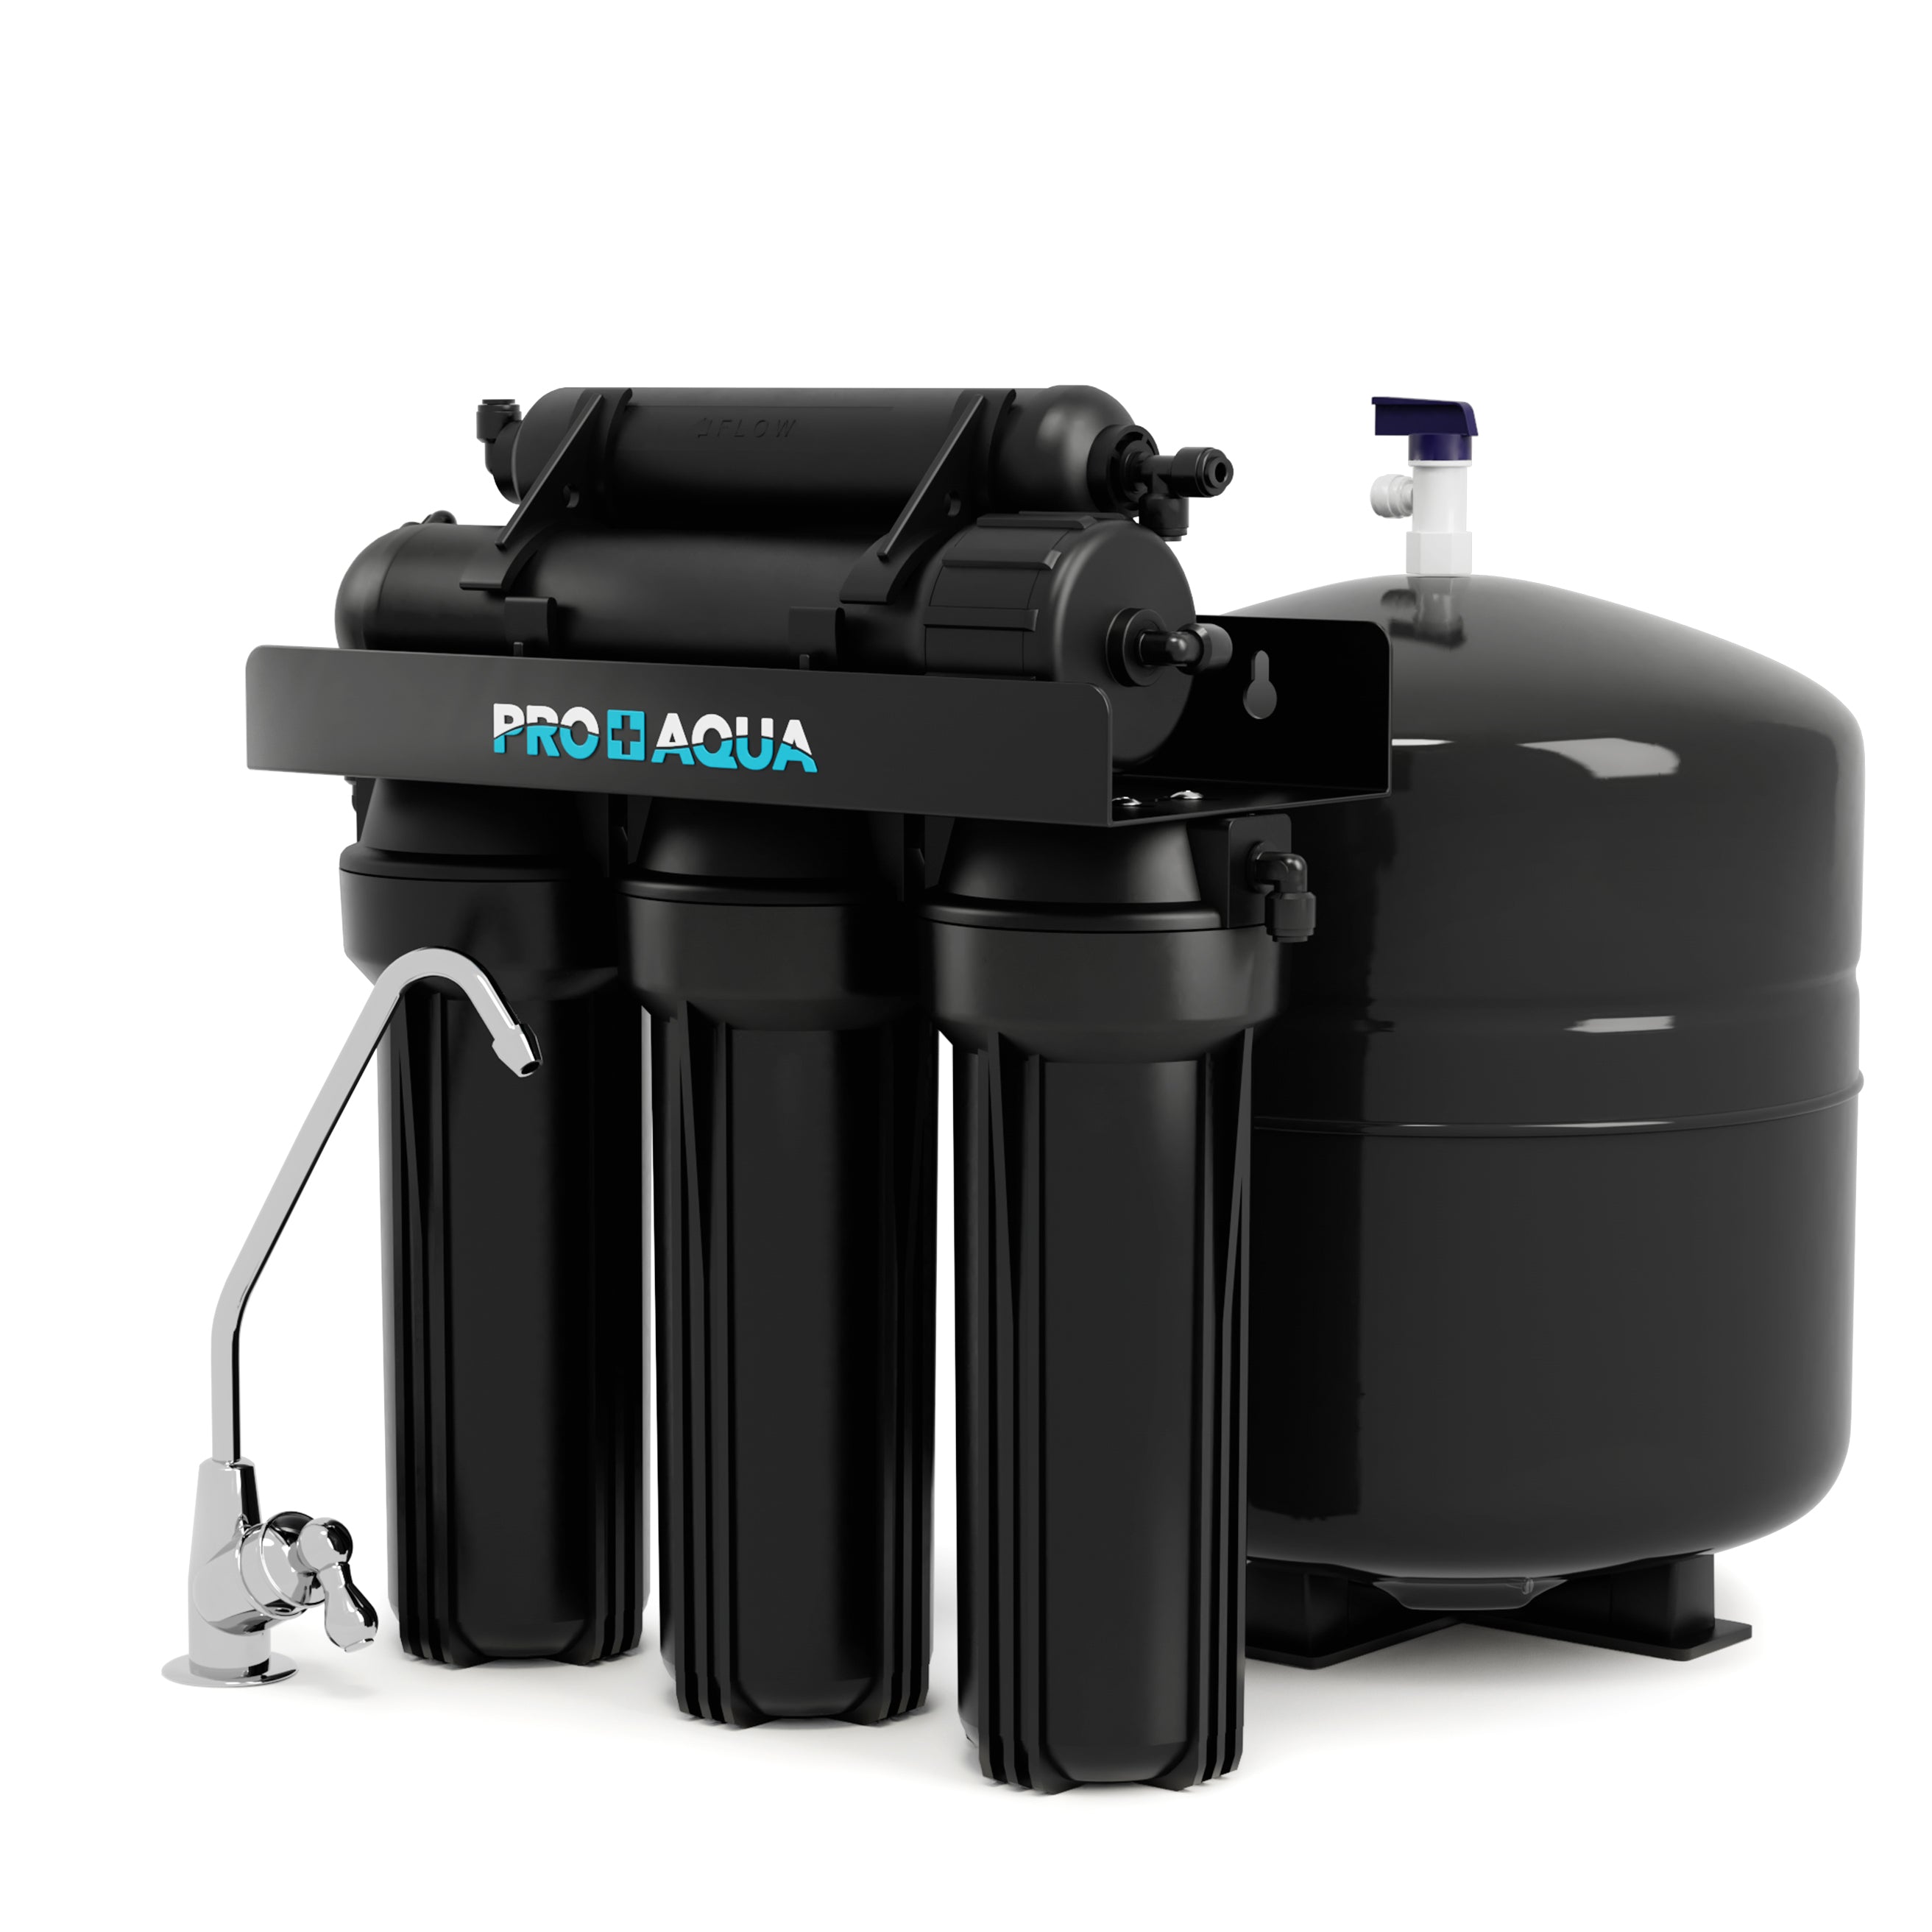 100 GPD Home RO Drinking Water System | 5 Stage RO System